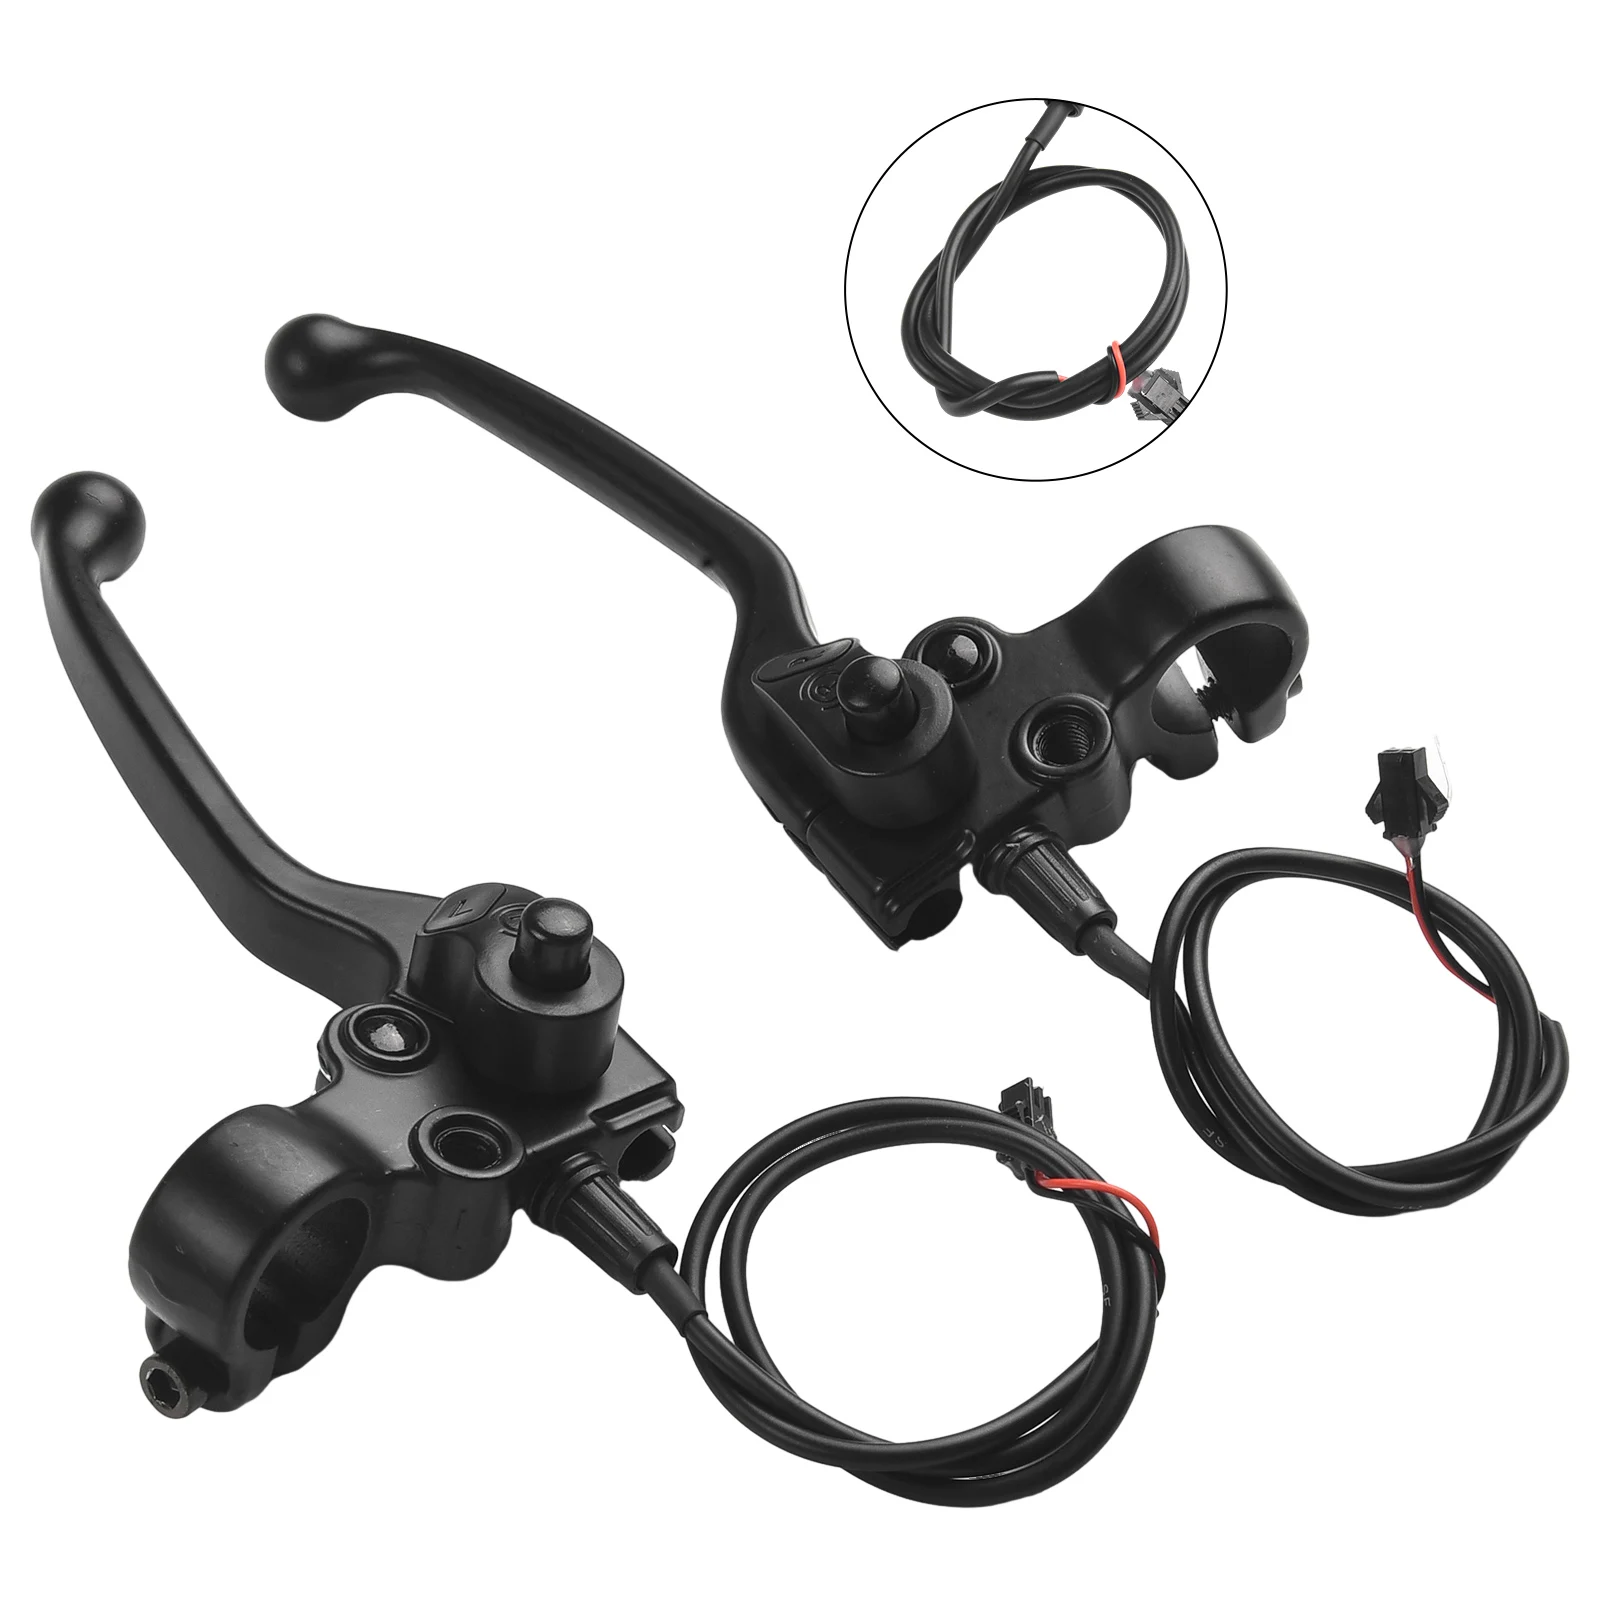 

Mechanical Bike Brake Levers 1 Pair Black E-bike Electric Bicycle Part With Parking Button Brand New Durable And Practical